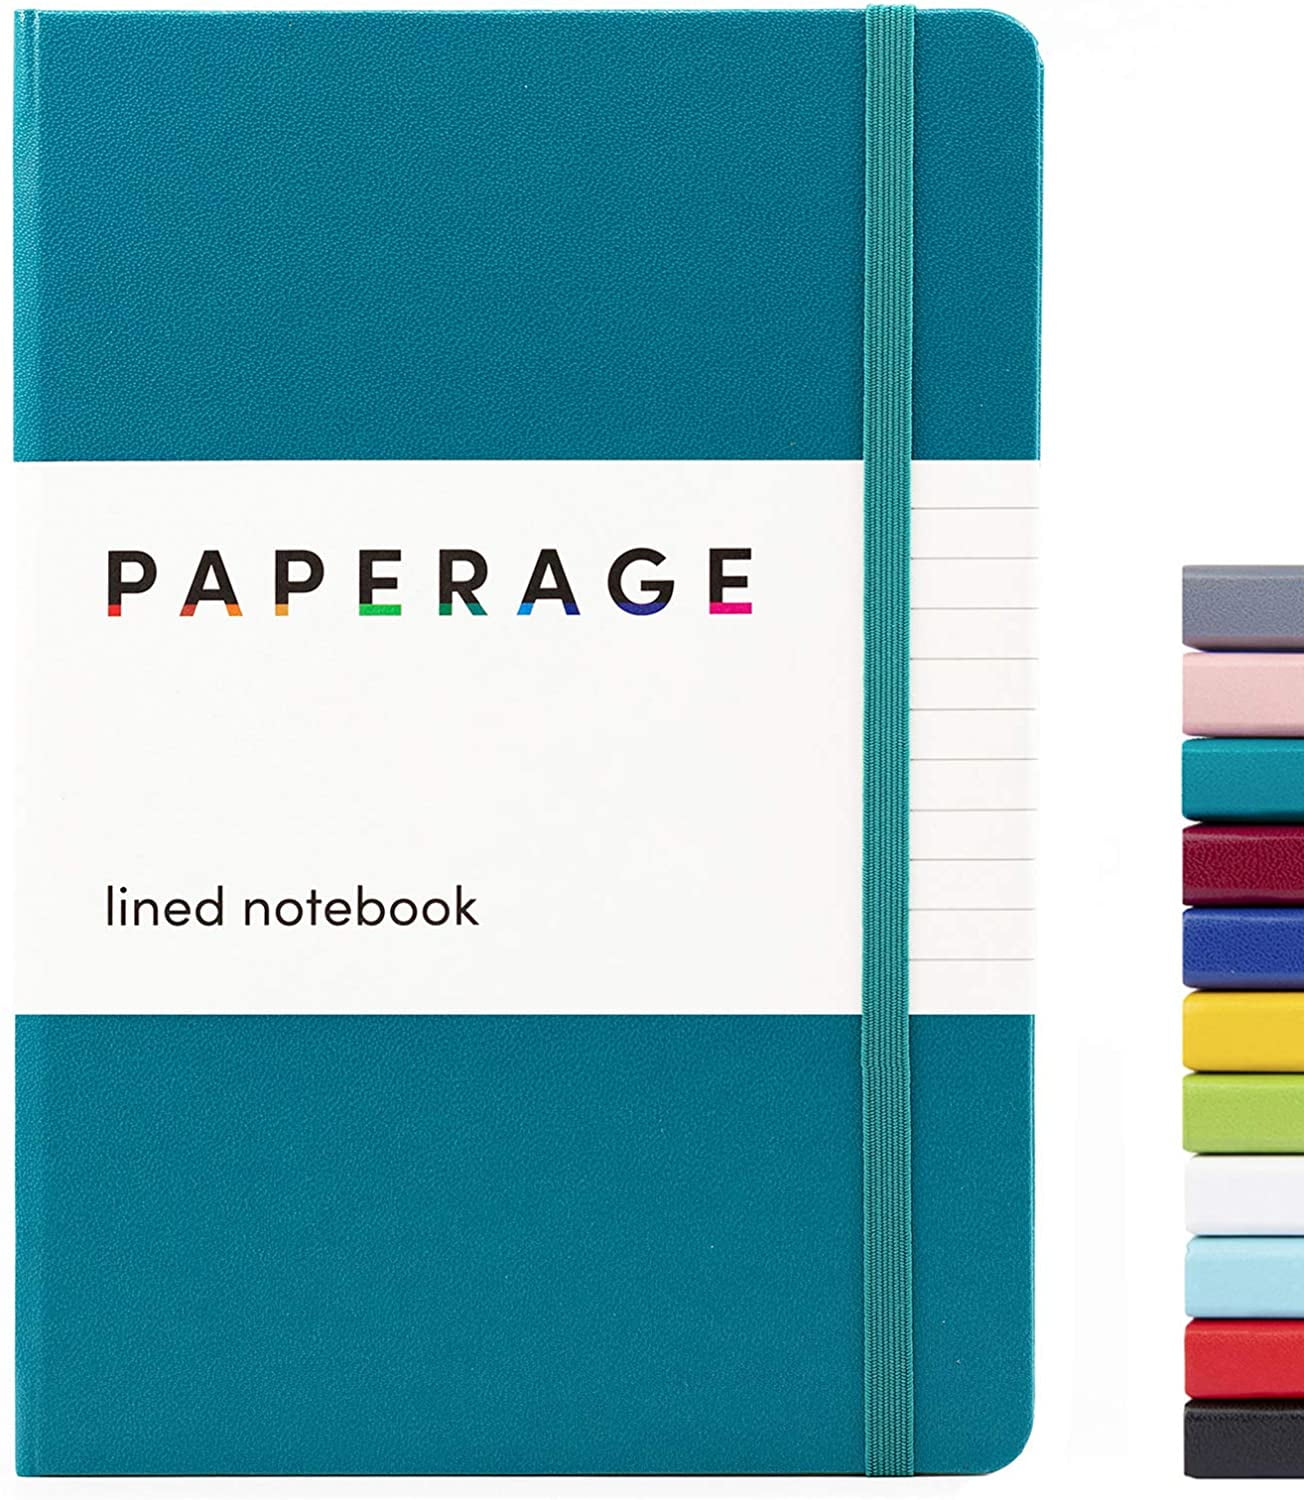 PAPERAGE Lined Spiral Journal Notebook, Double-Wire Spiral Journal & Notebook Medium 5.7 inches x 8 inches Hardcover 100 GSM Thick Paper SkyBlue 160 Pages 